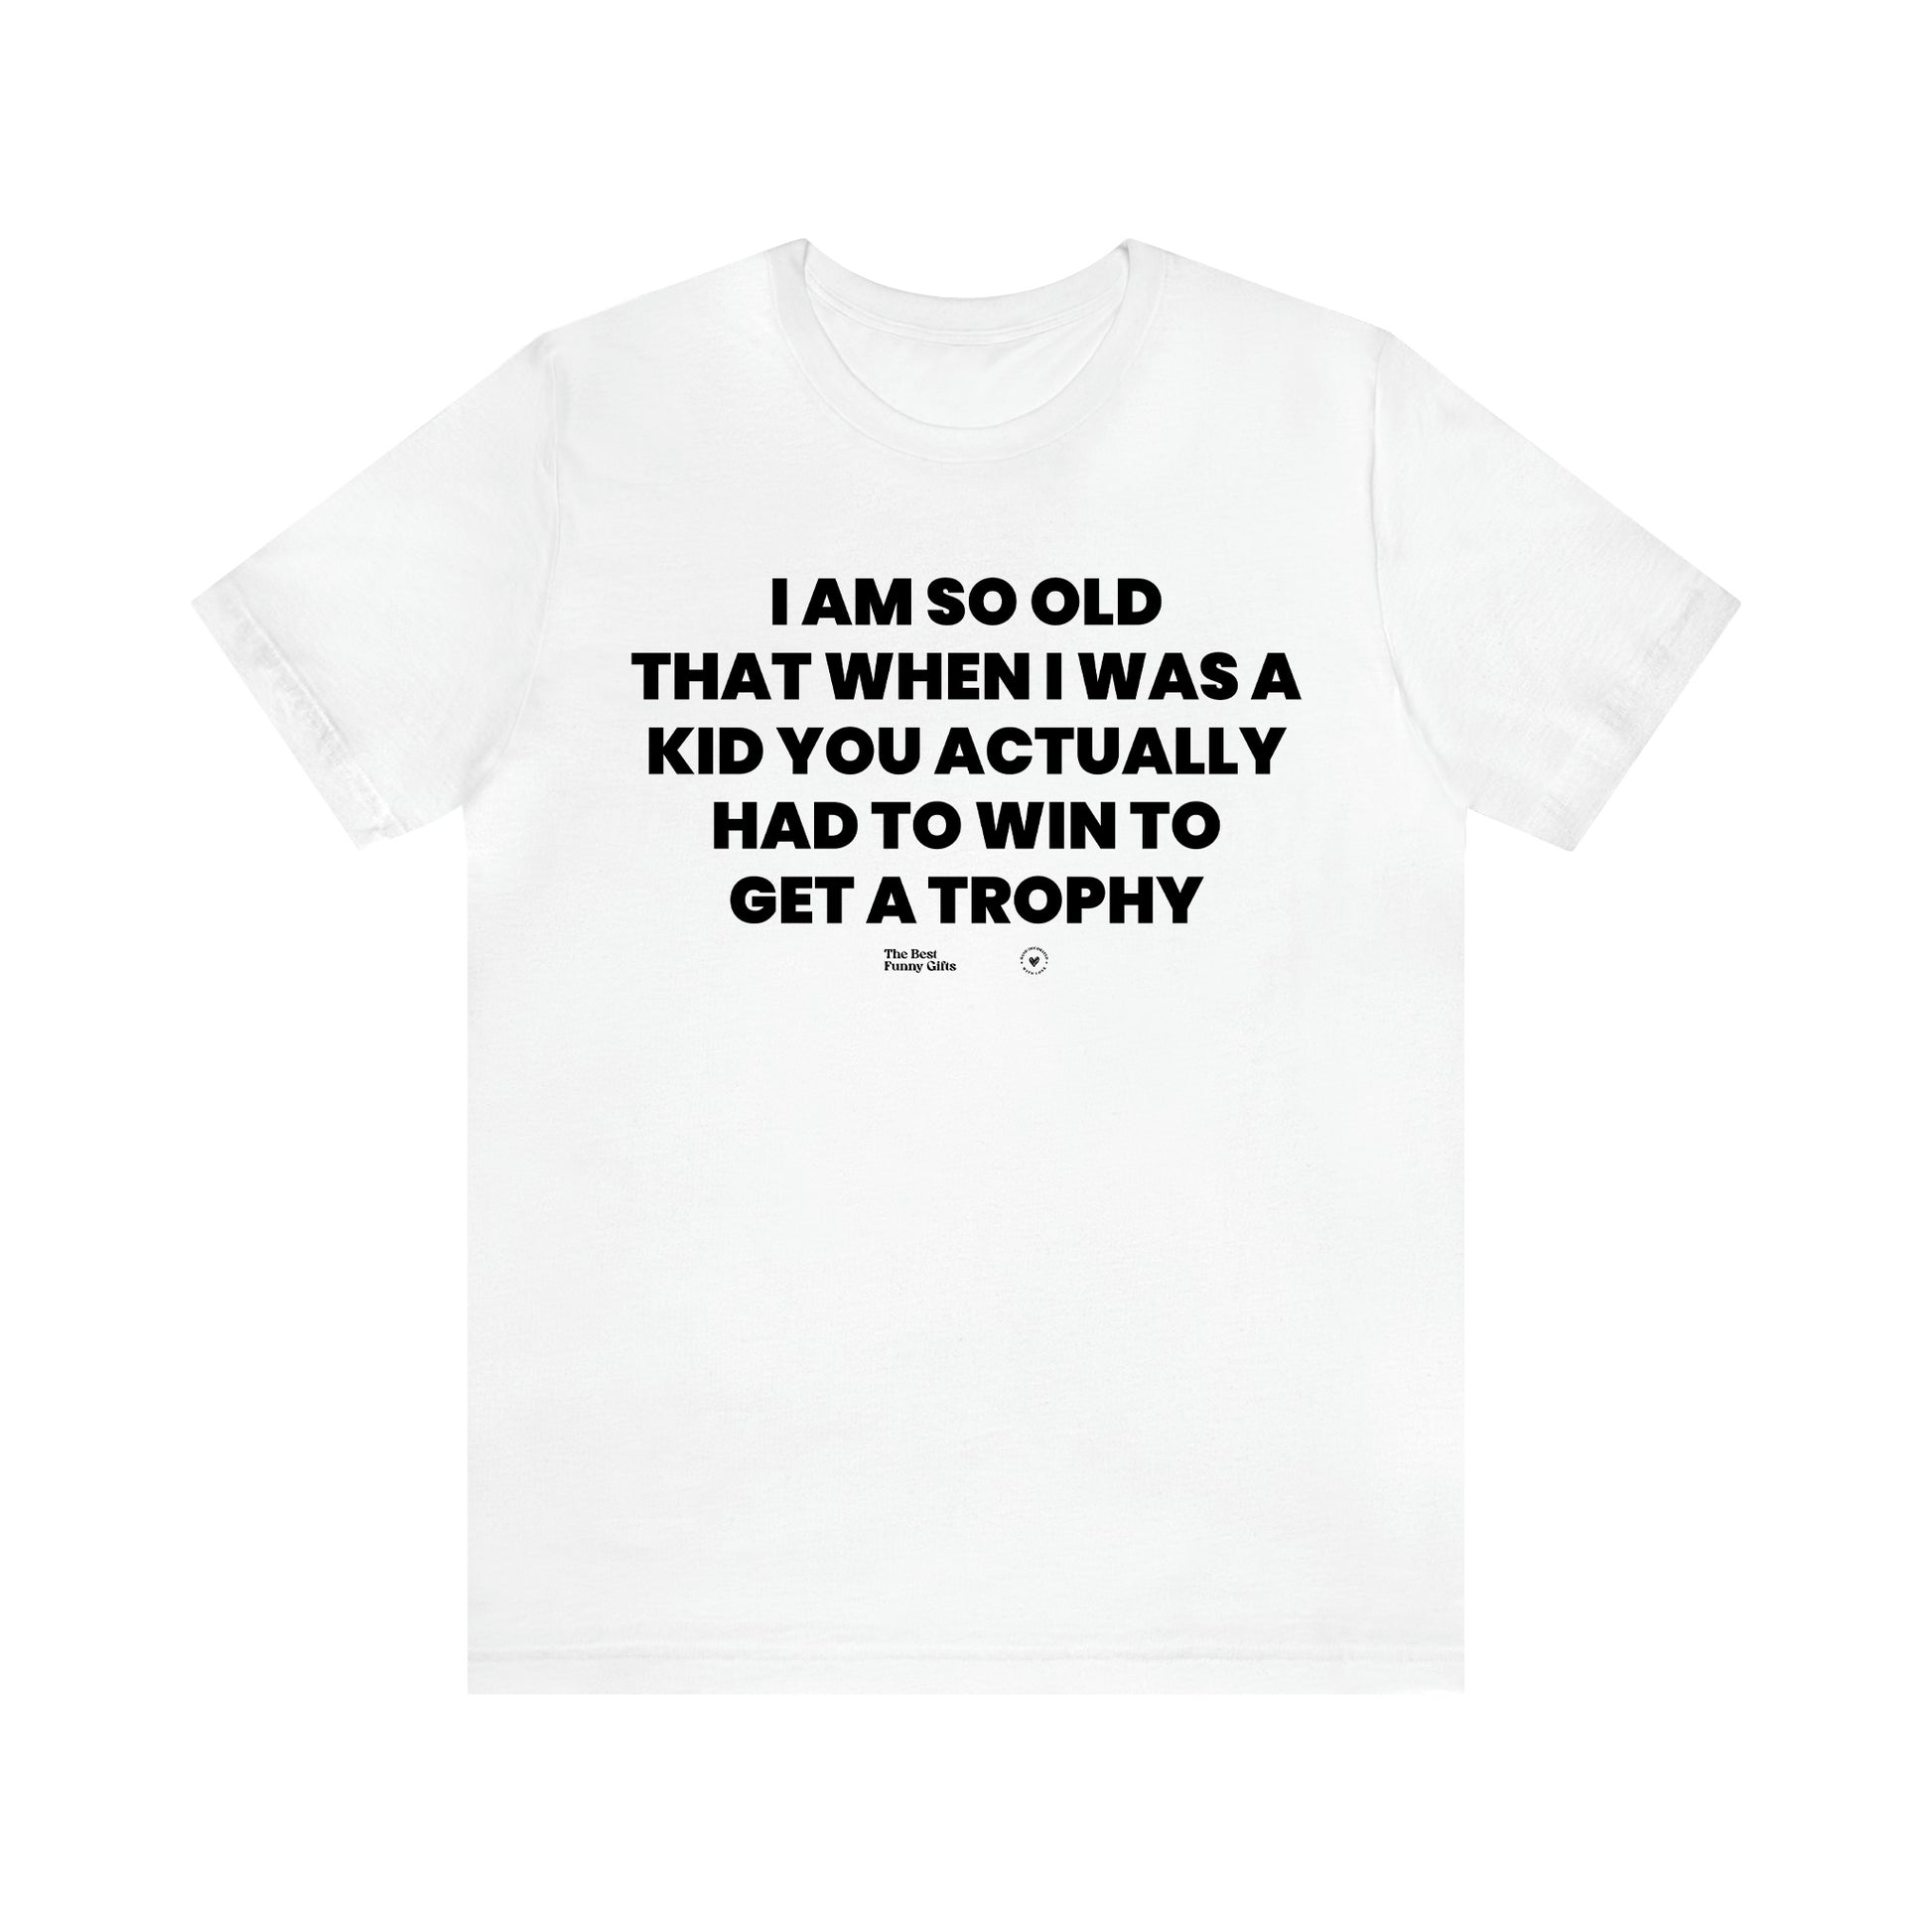 Men's T Shirts I Am So Old That When I Was a Kid You Actually Had to Win to Get a Trophy - The Best Funny Gifts